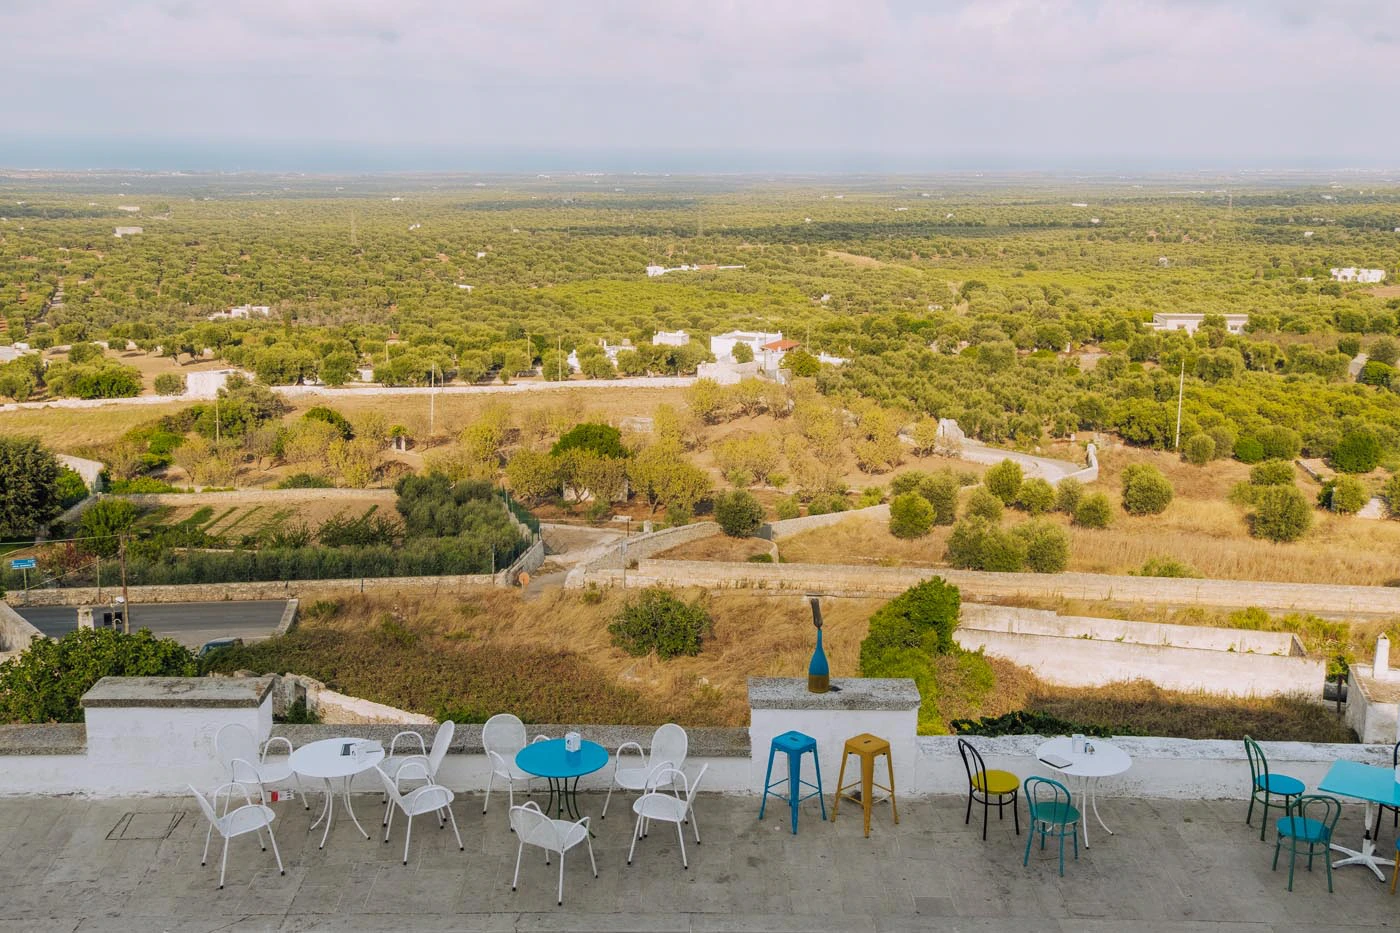 Things to do in Ostuni - Olive Groves - Ulivi Millenari